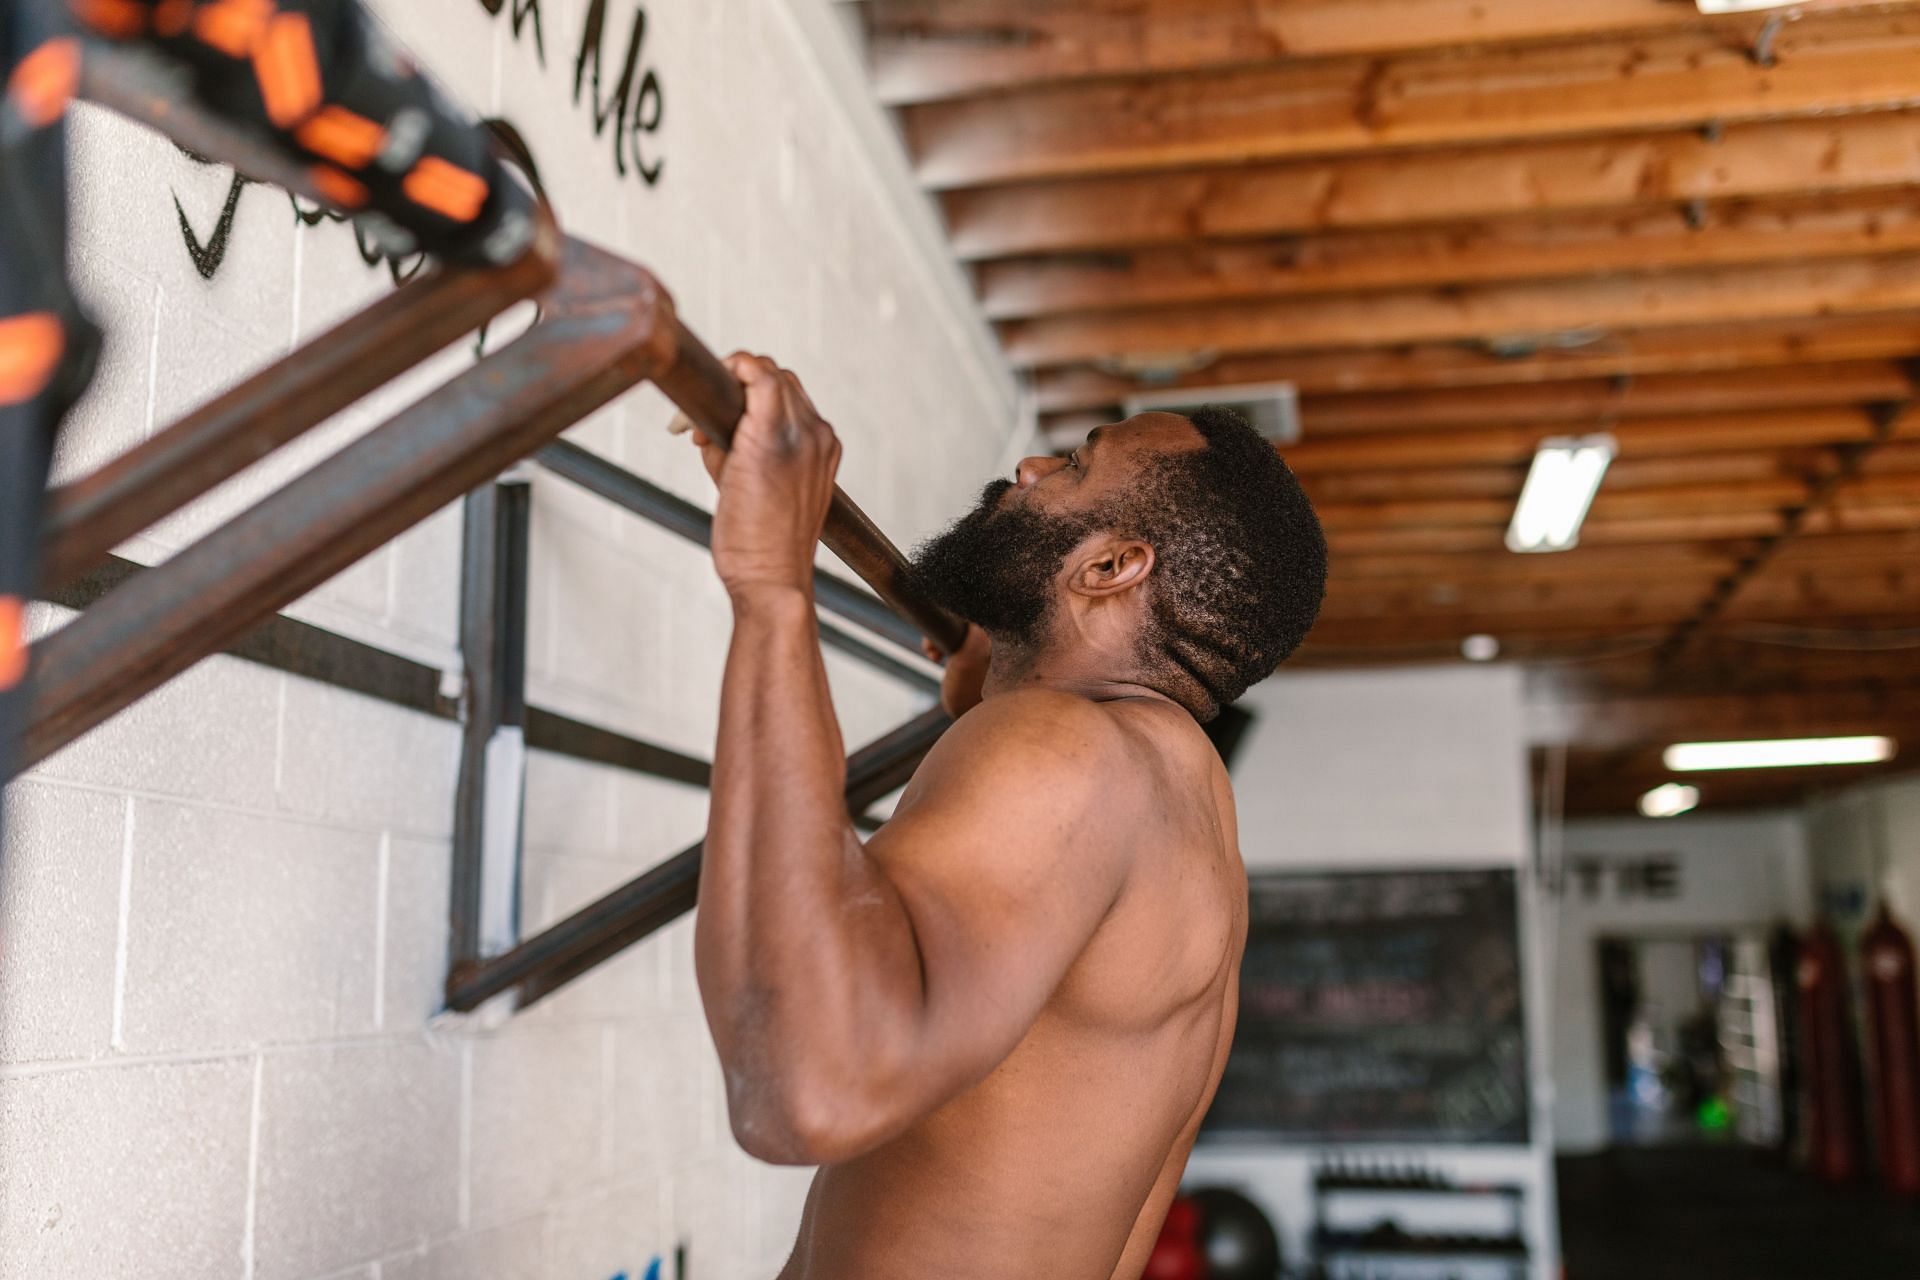 Pull-up bars are an excellent piece of equipment for home workouts. (Image via Pexels)